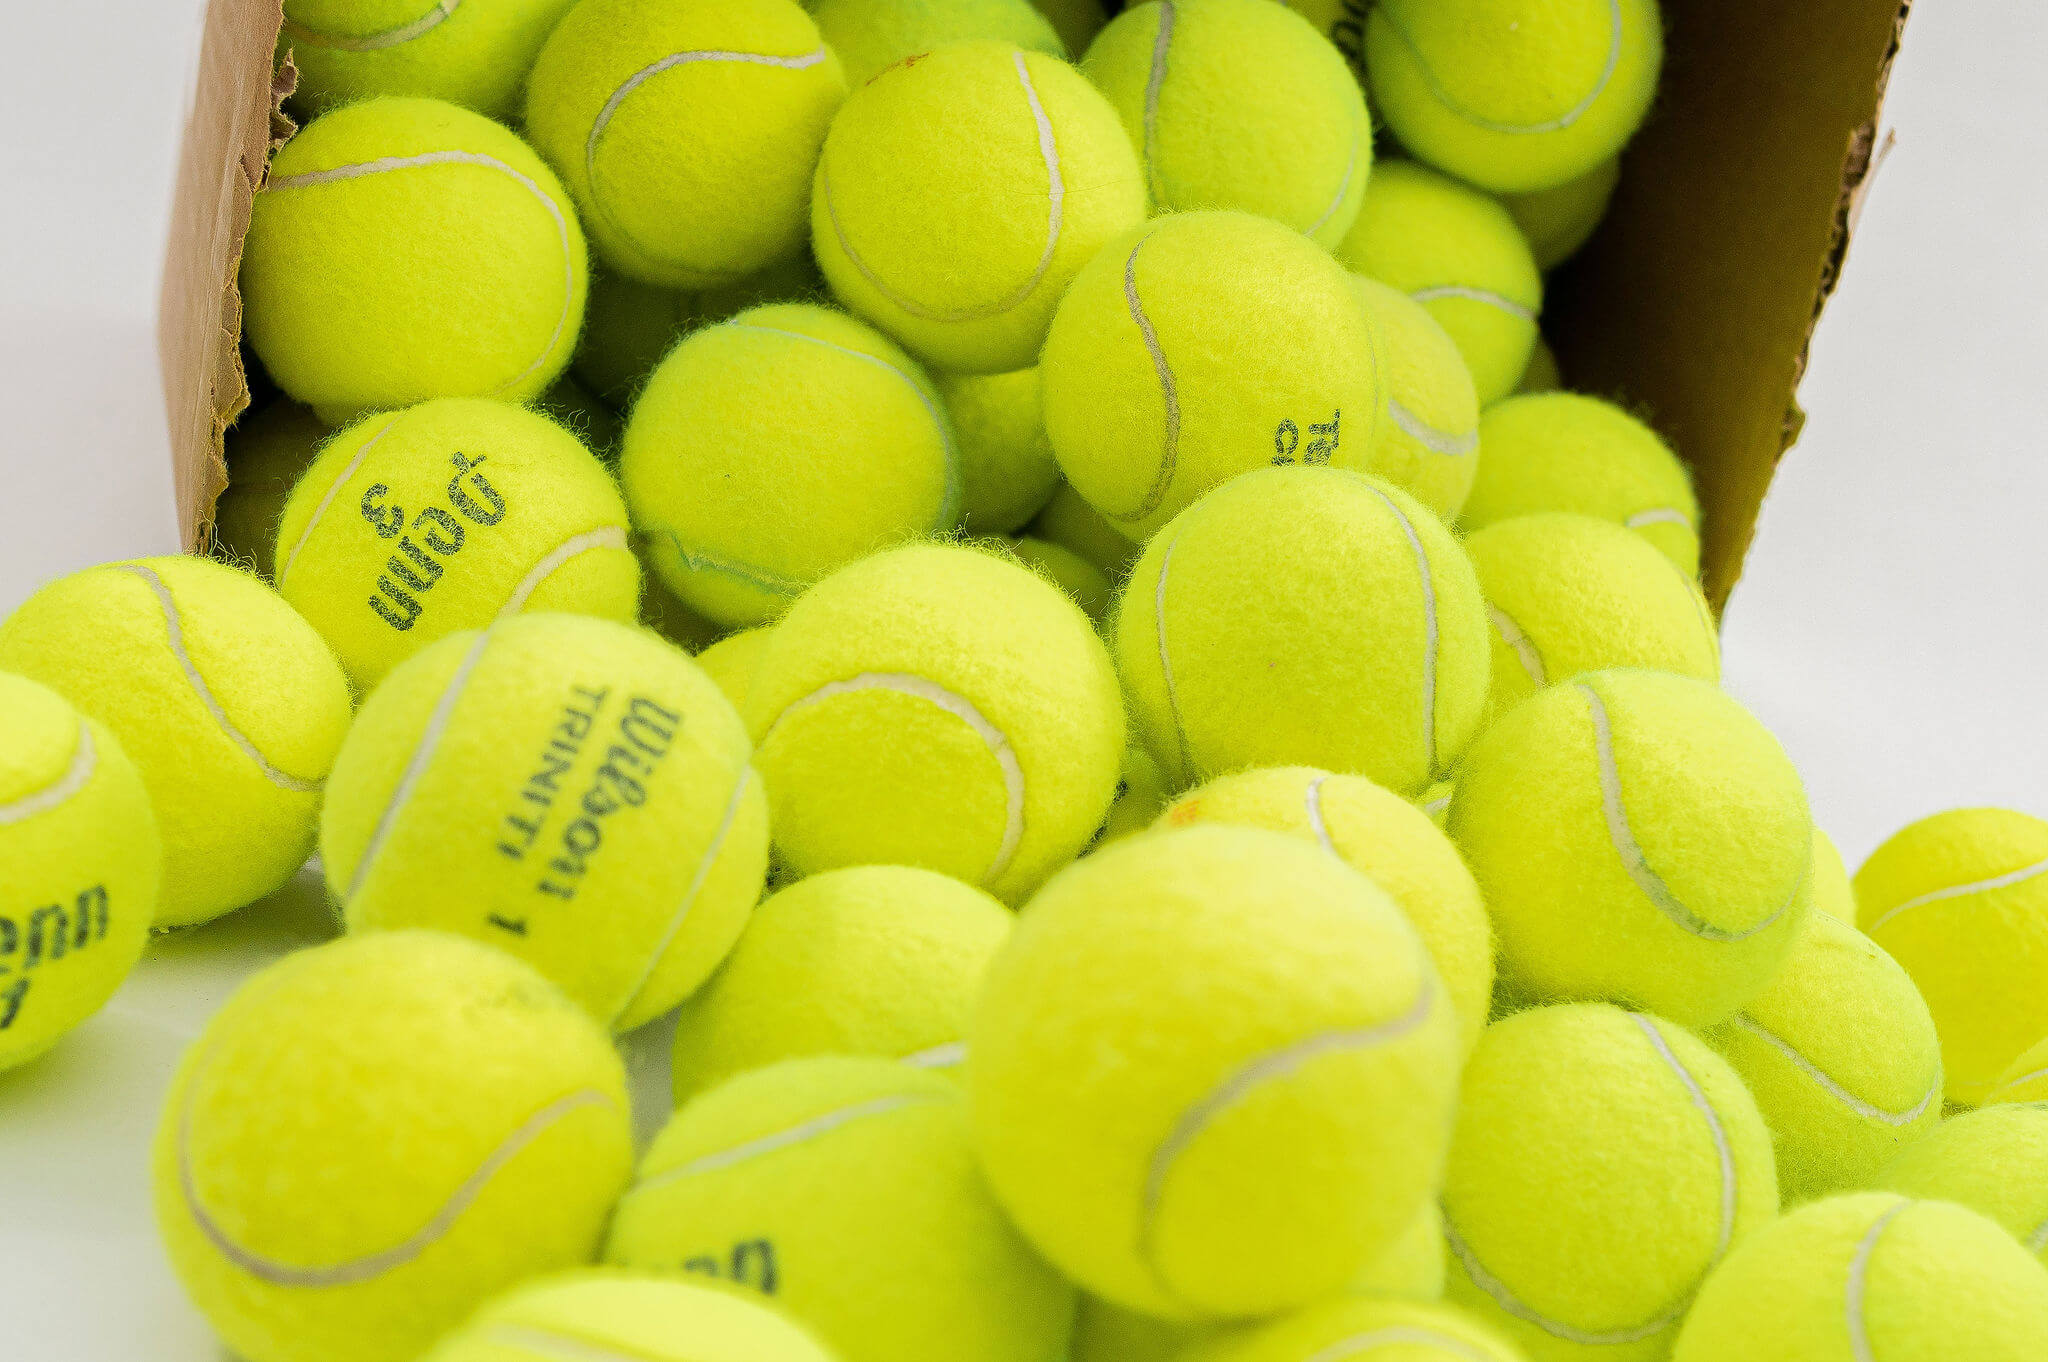 100 Tennis Balls For Dogs